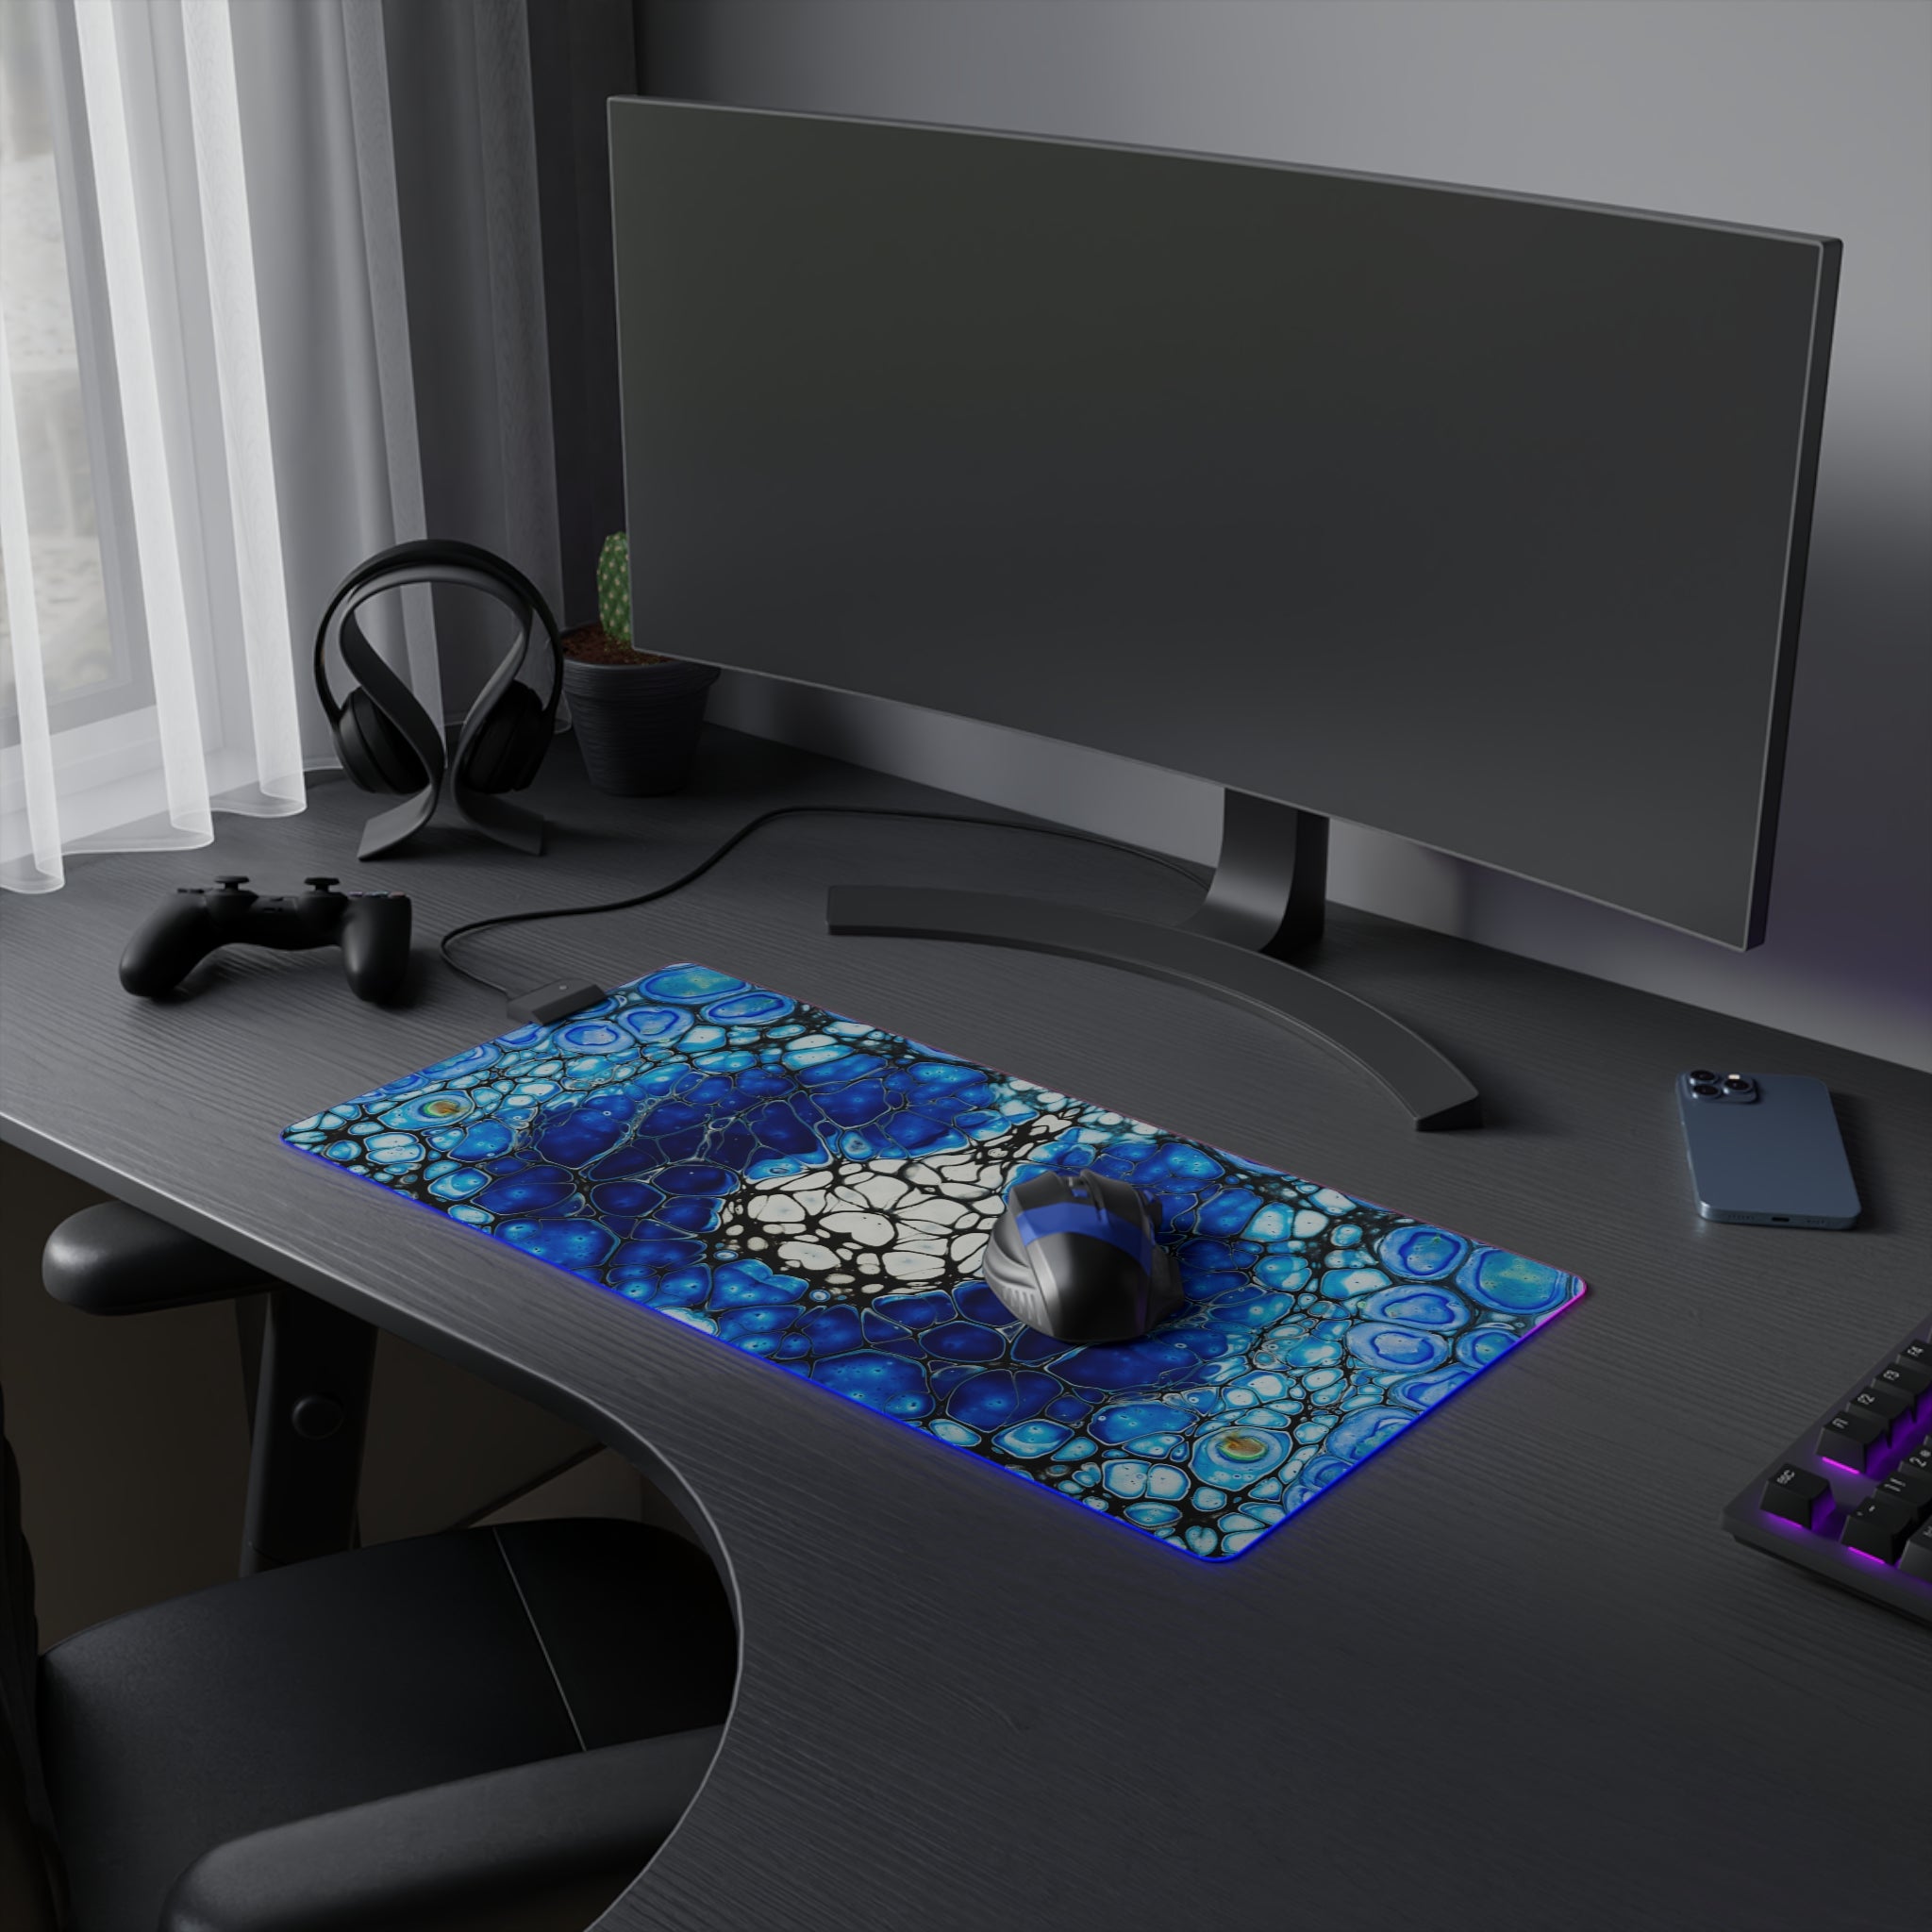 Cameron Creations - LED Gaming Mouse Pad - Cellonious B - Concept 4